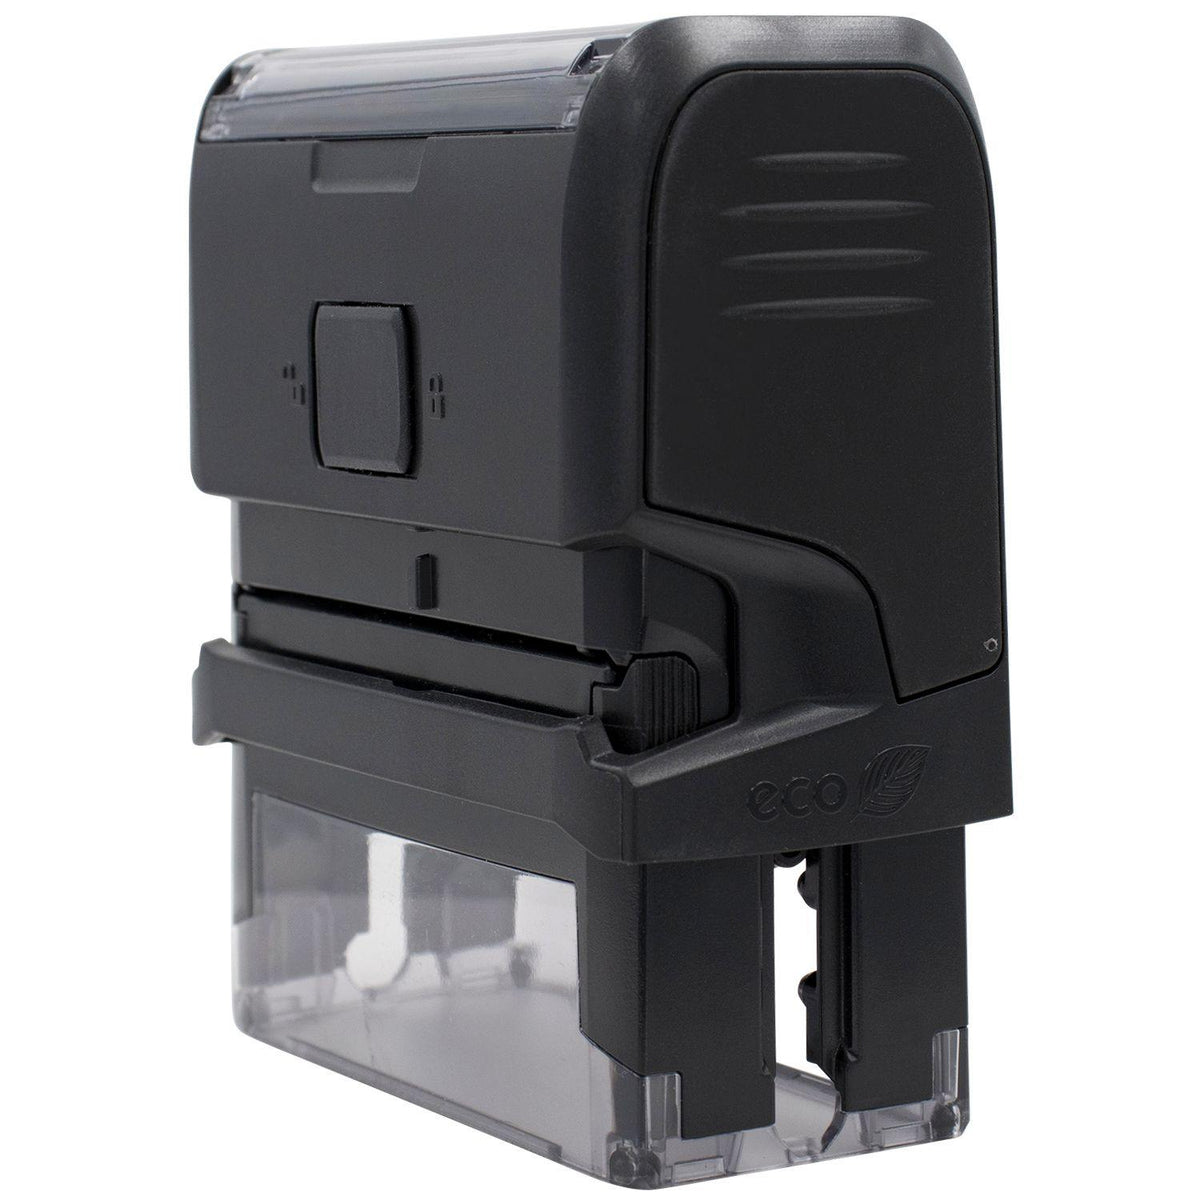 Large Self-Inking Scanned with Line Stamp - Engineer Seal Stamps - Brand_Trodat, Impression Size_Large, Stamp Type_Self-Inking Stamp, Type of Use_Office